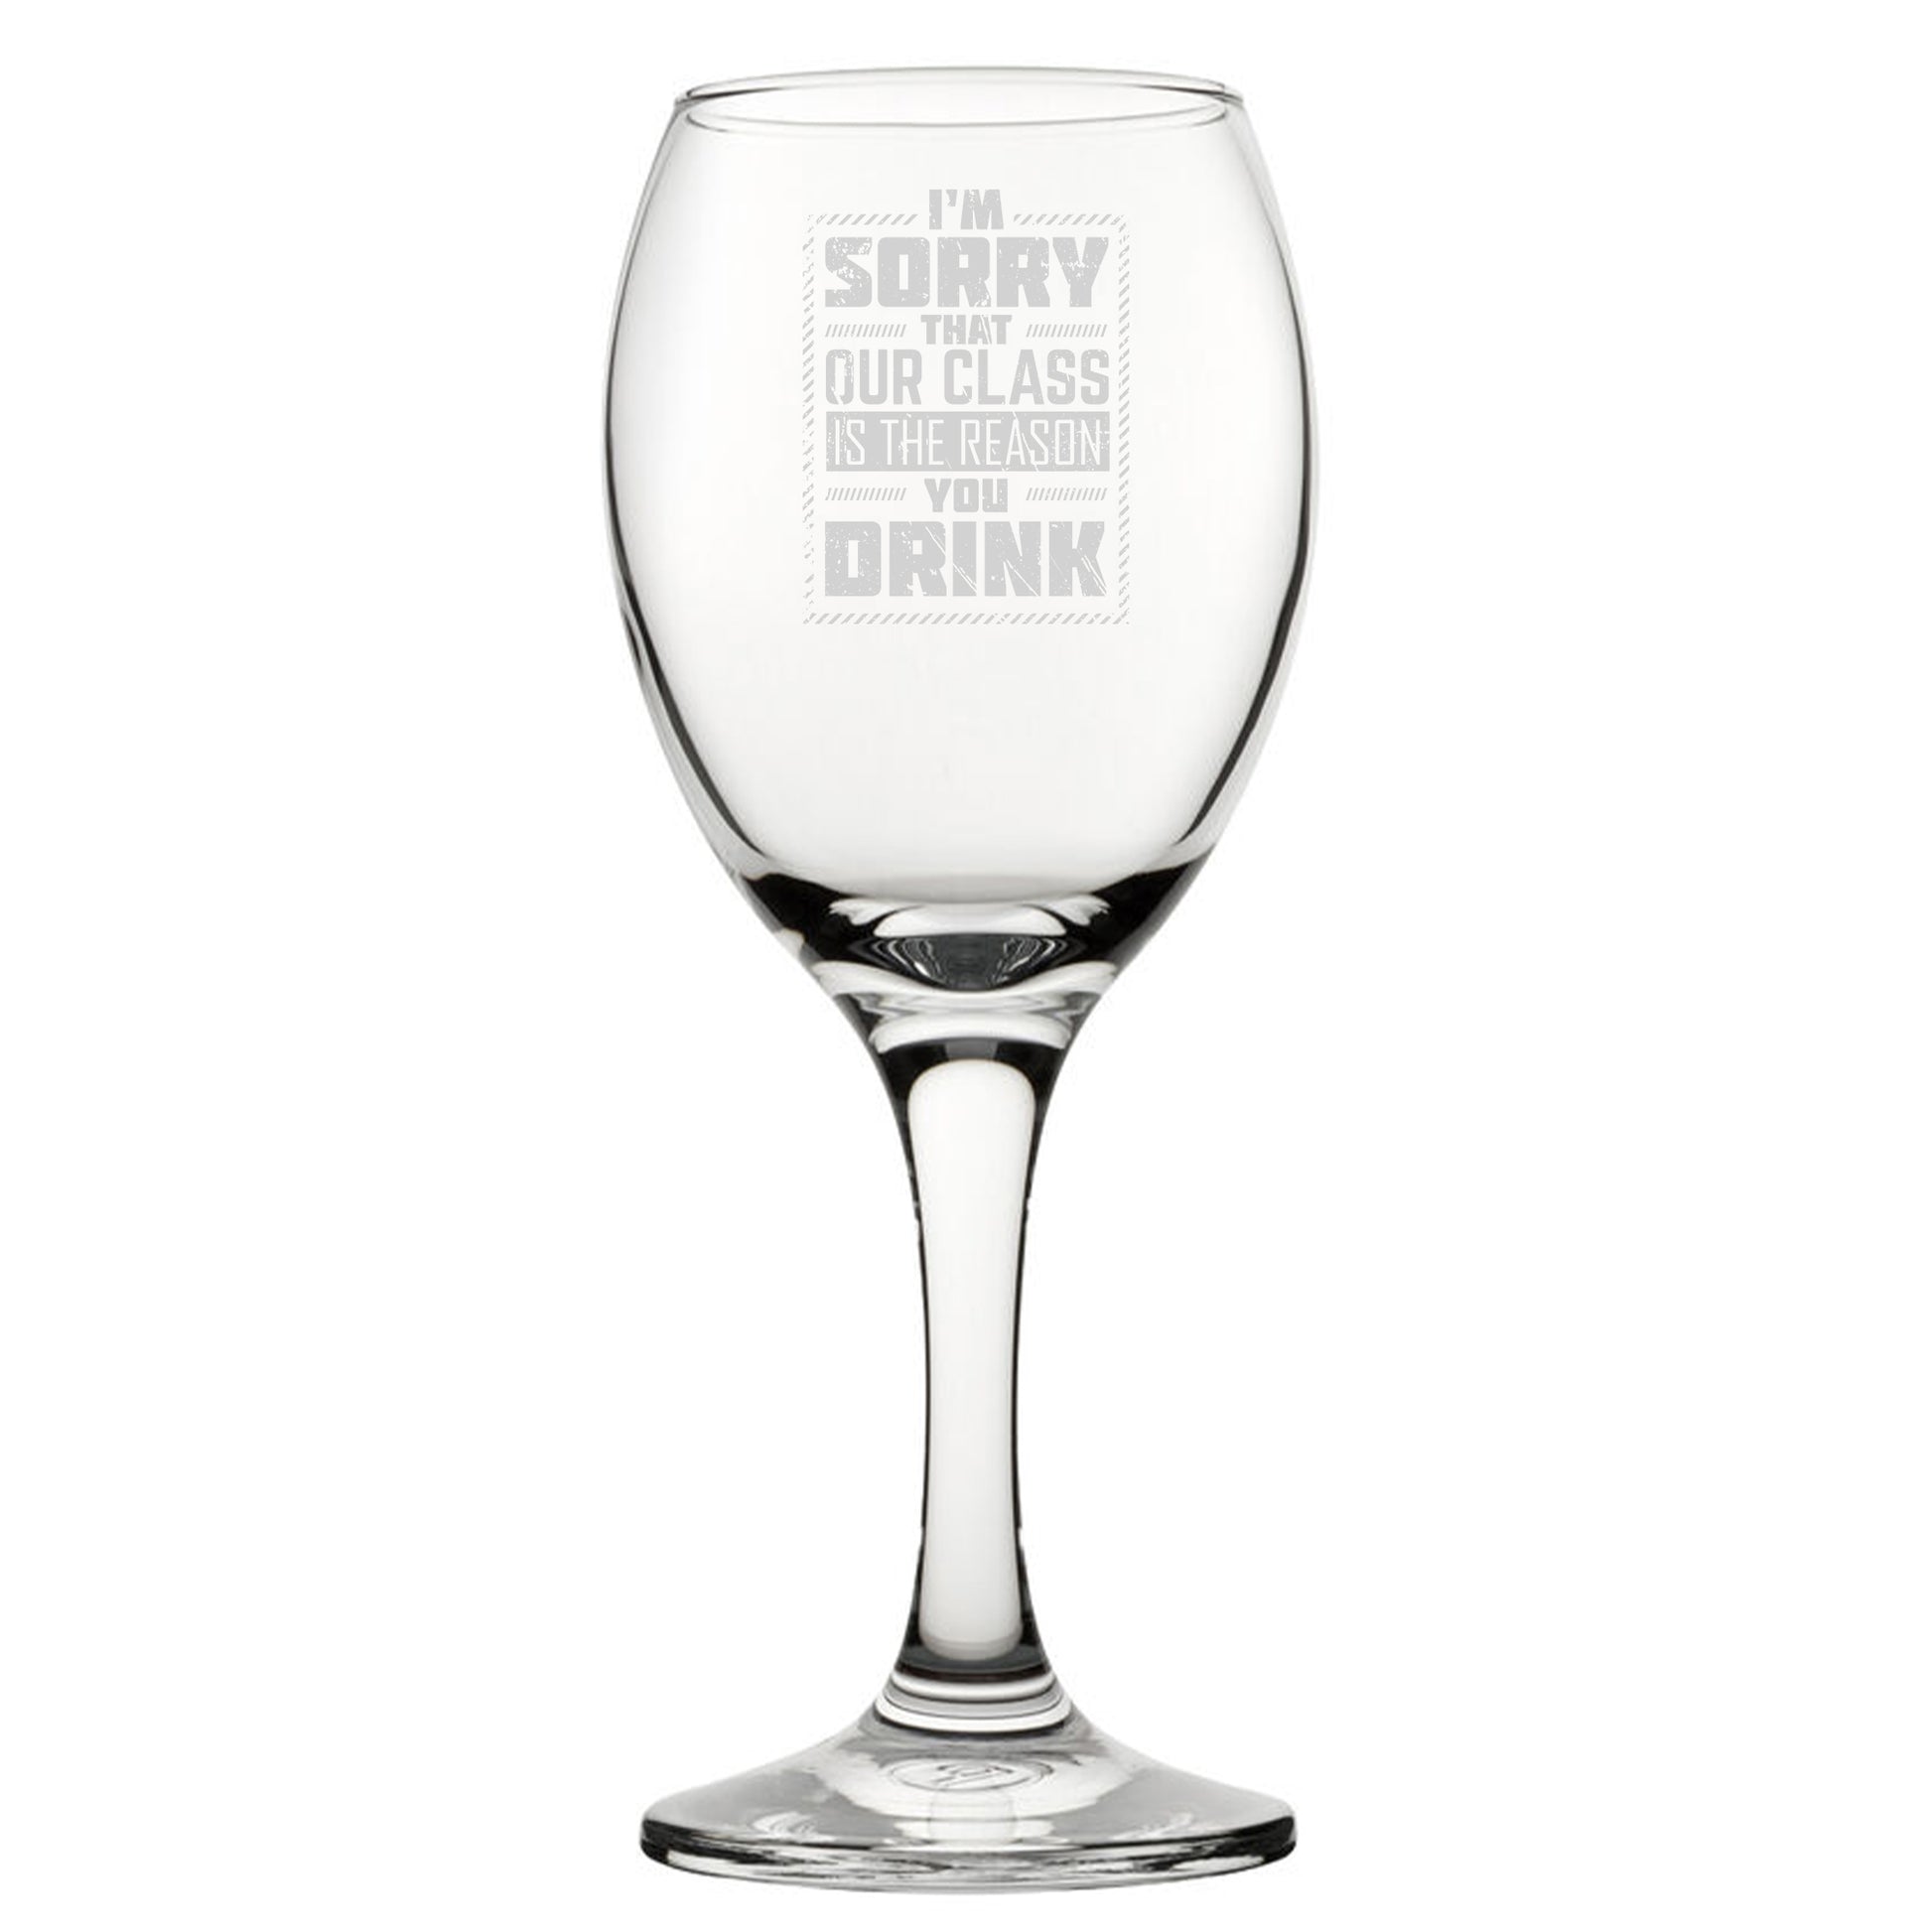 I'm Sorry That Our Class Is The Reason You Drink - Engraved Novelty Wine Glass Image 2